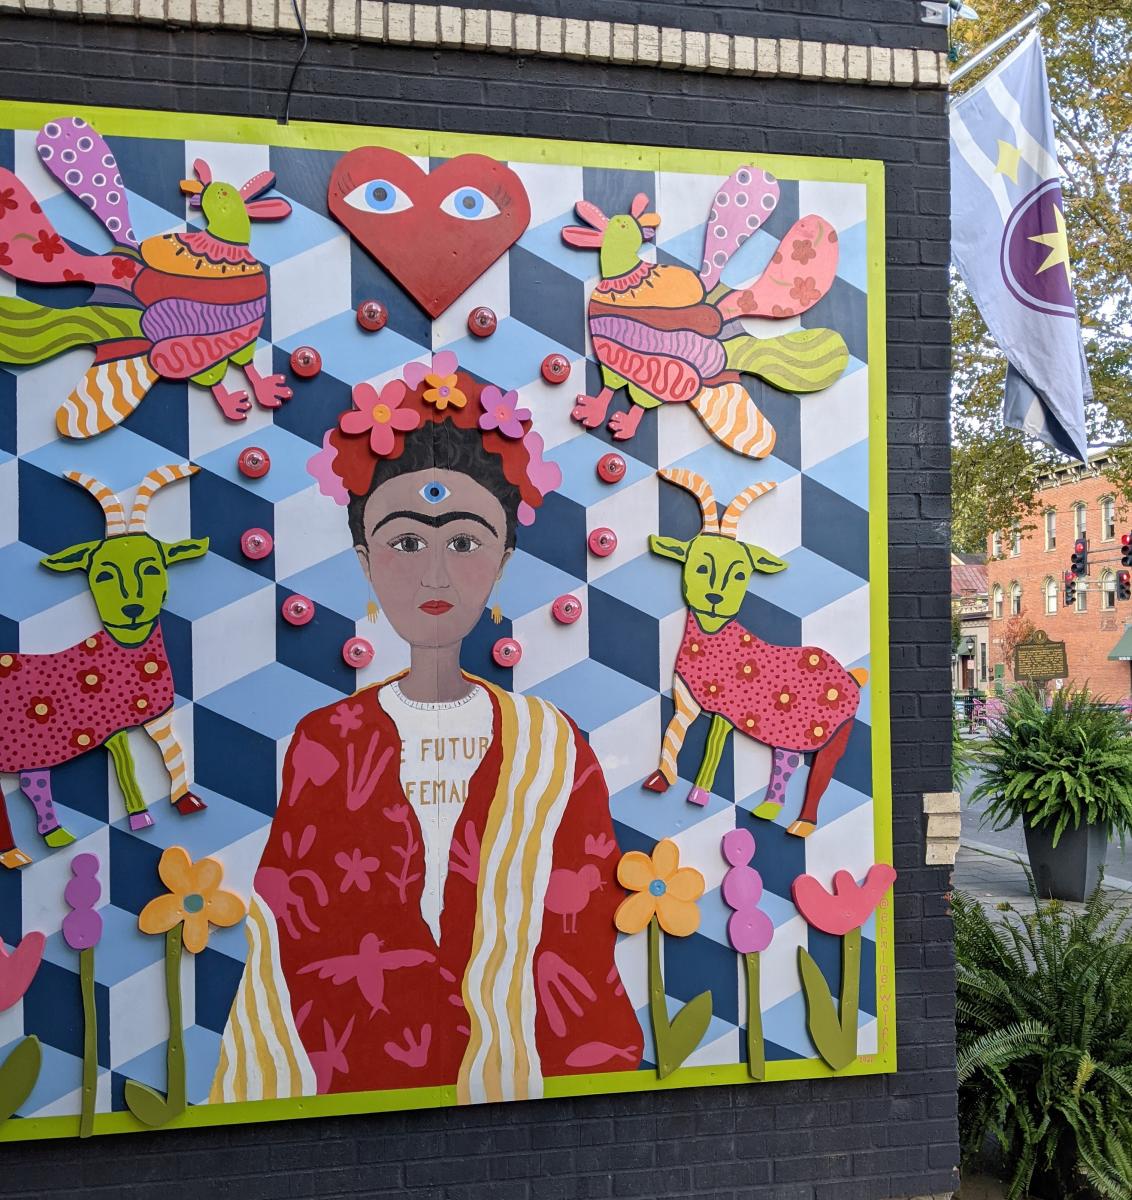 Mural designed like a multi-colored quilt with a portrait of Frida Kahlo in the center